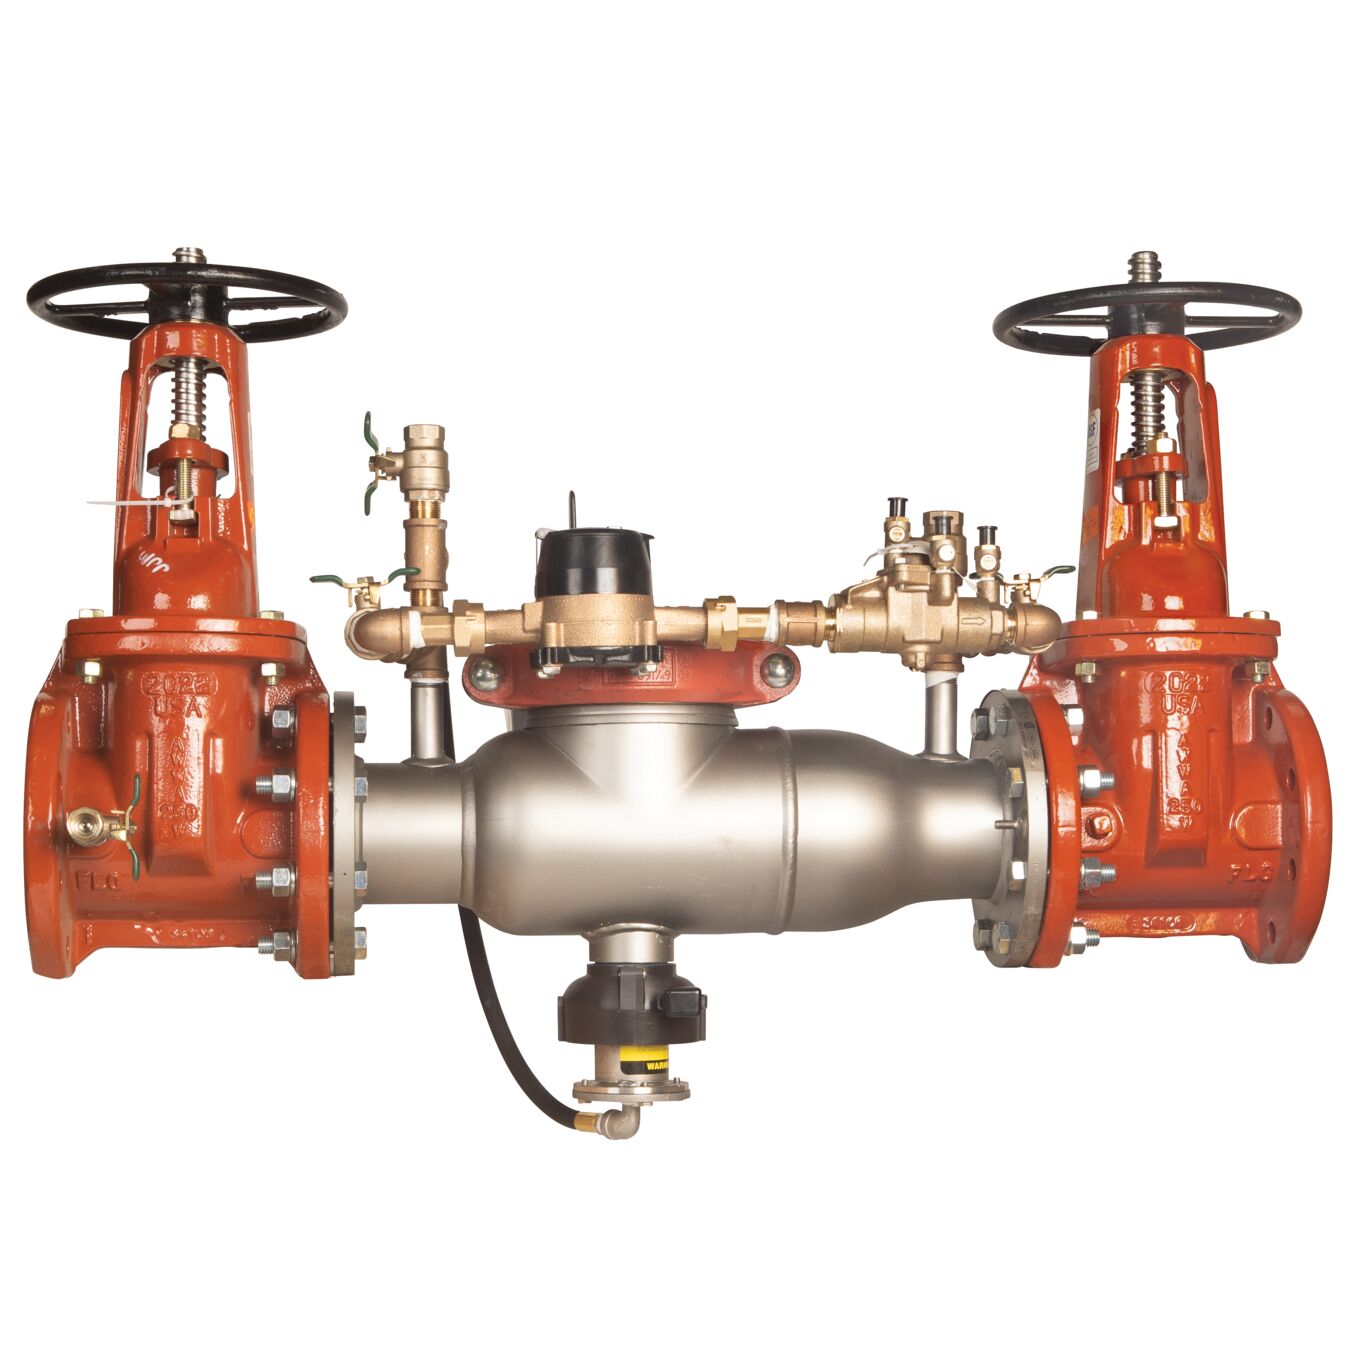 994RPDA Reduced Pressure Zone Assembly Backflow Preventer, Stainless Steel, OSY Gates and Meter and Flood Sensor